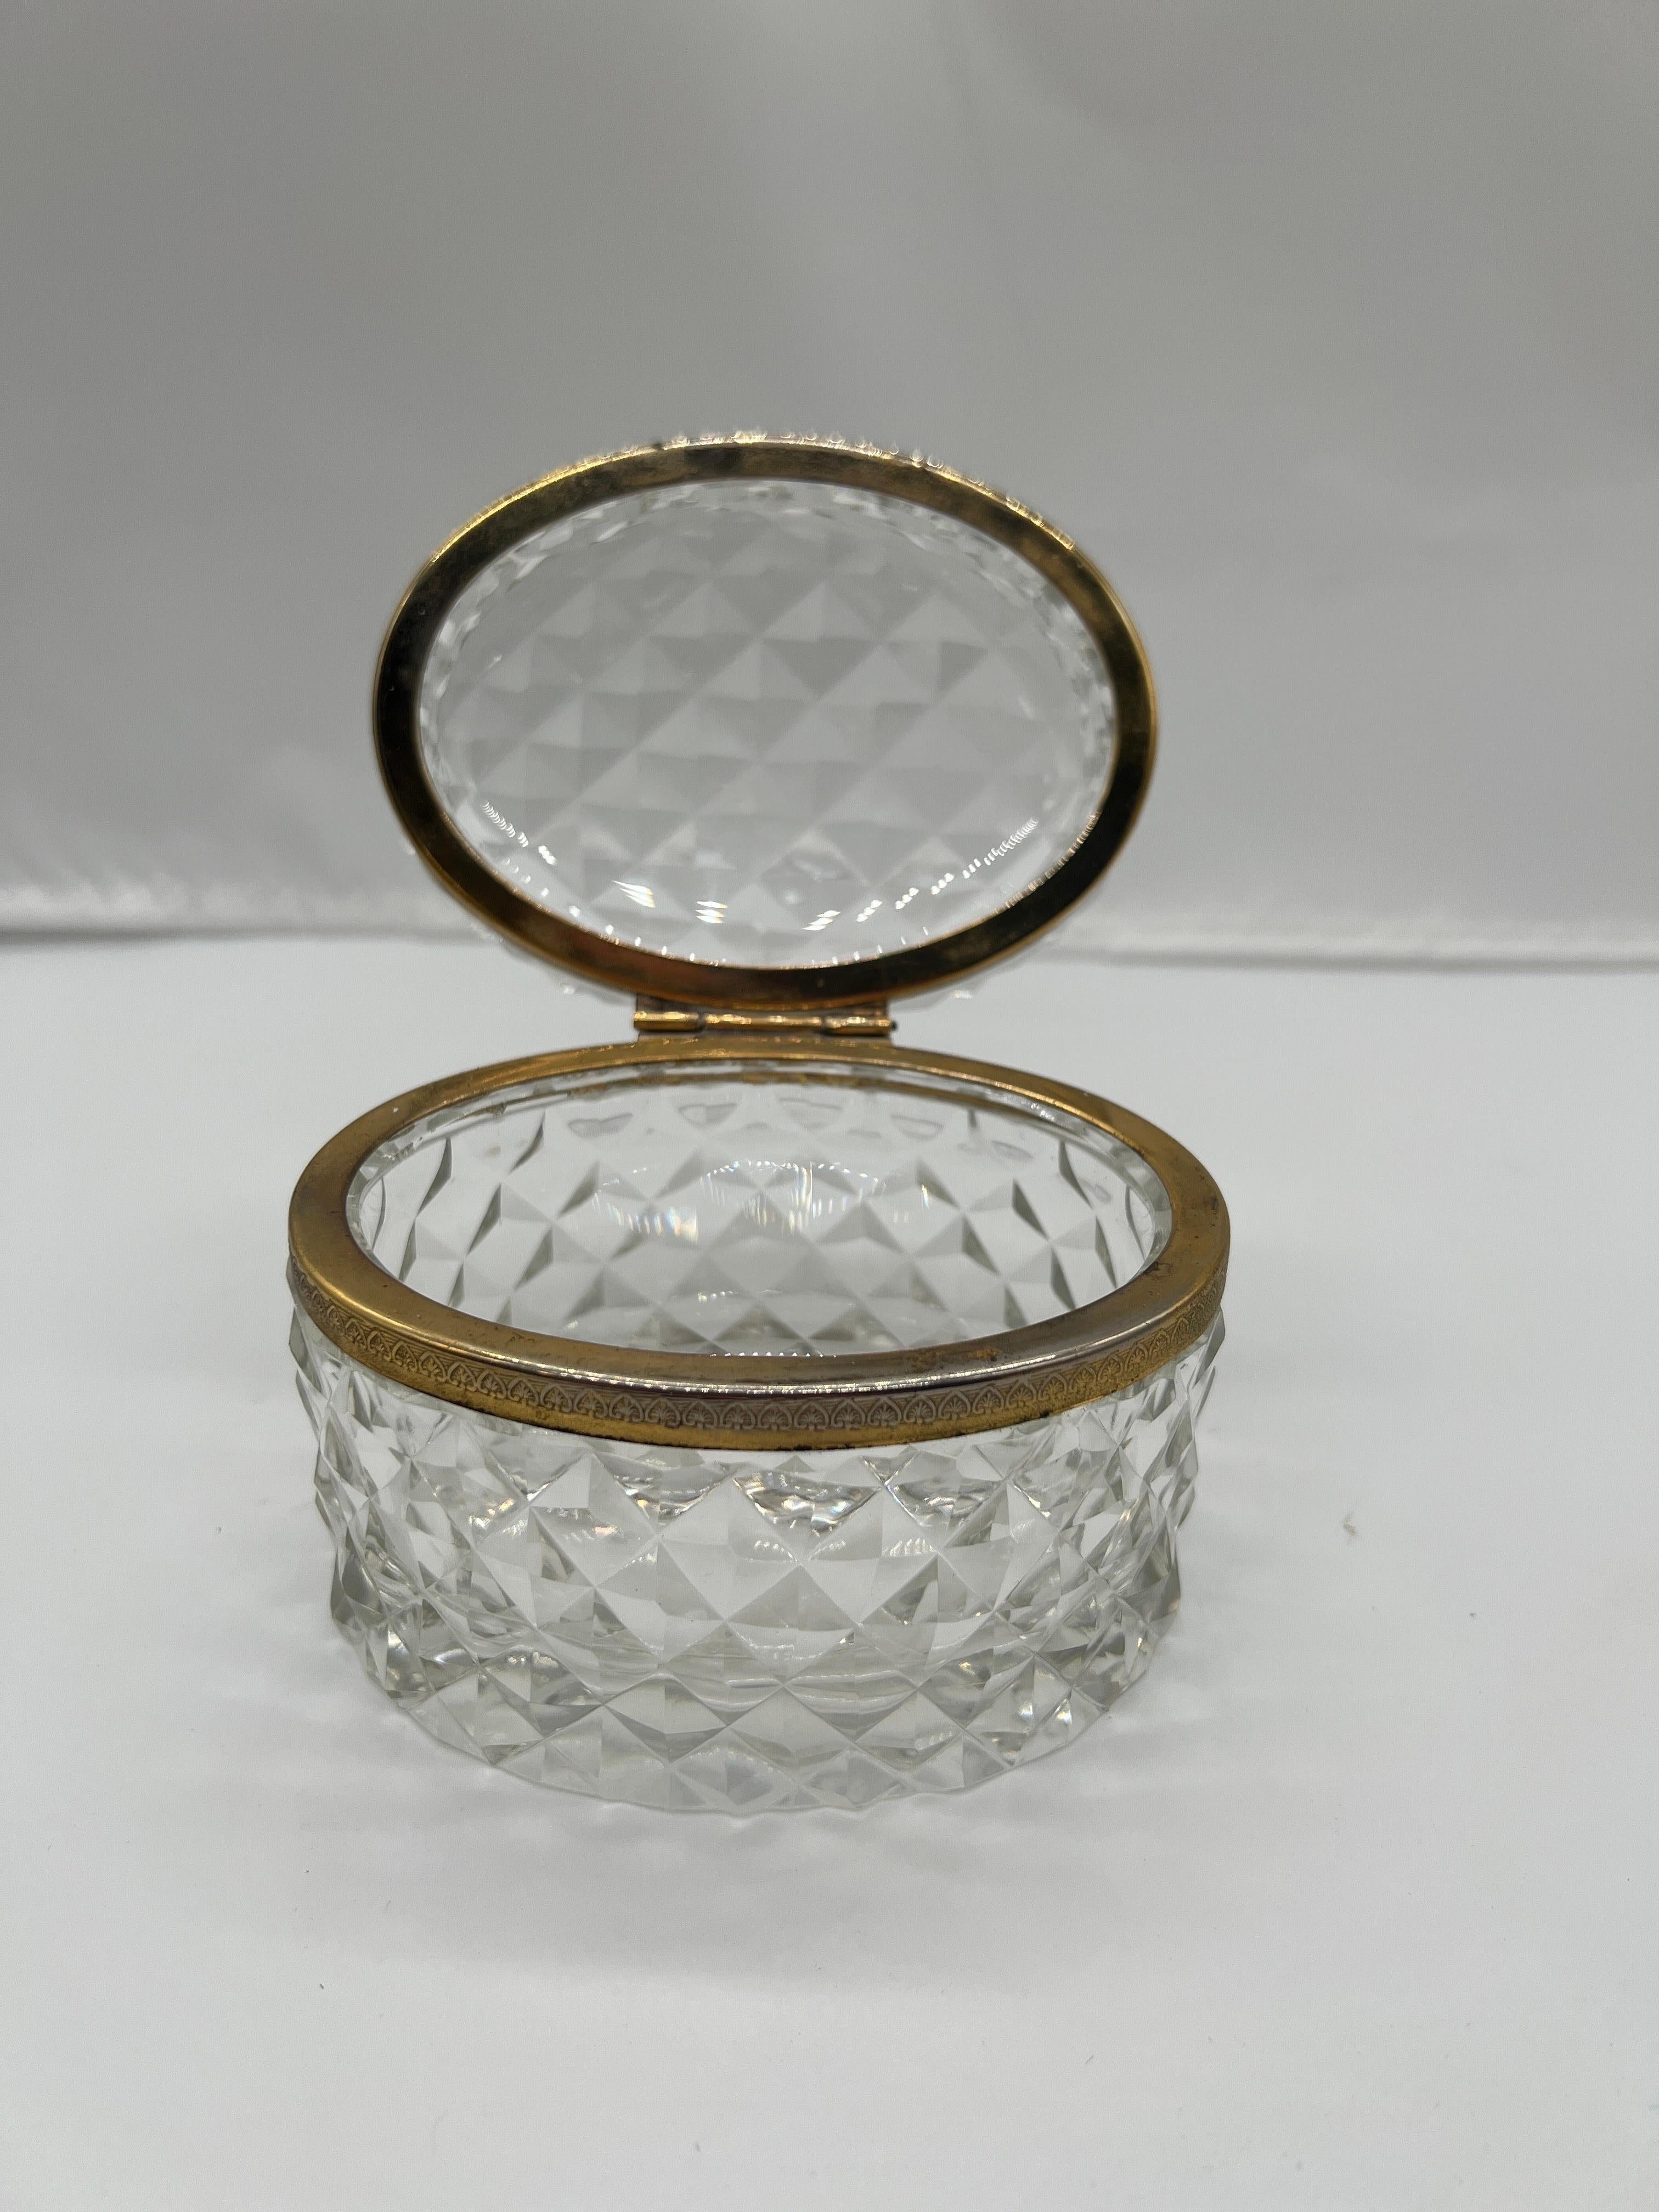 A wonderful early to mid 20th century crystal faceted box or jewelry casket in the style of Baccarat. The piece has a brass ormolu mounted ring to the center which is hinged. 